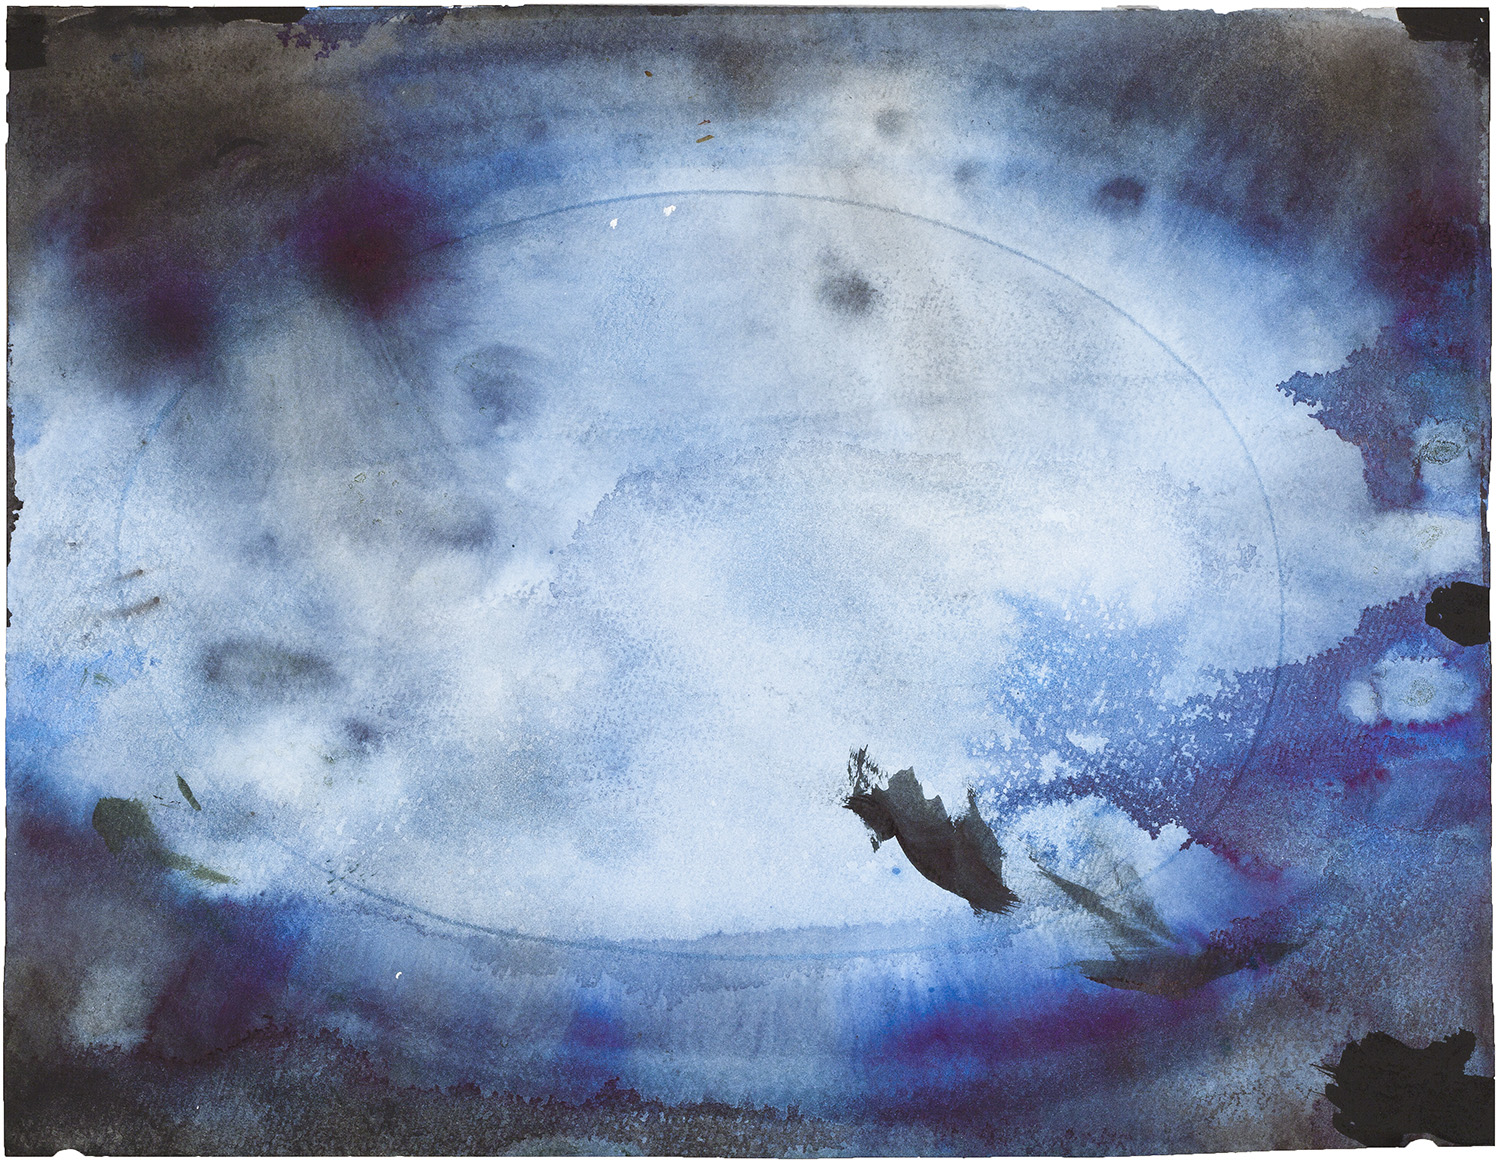  Untitled (Post-Antarctic 2B), 2011, watercolor on paper, 11 x 14 inches 